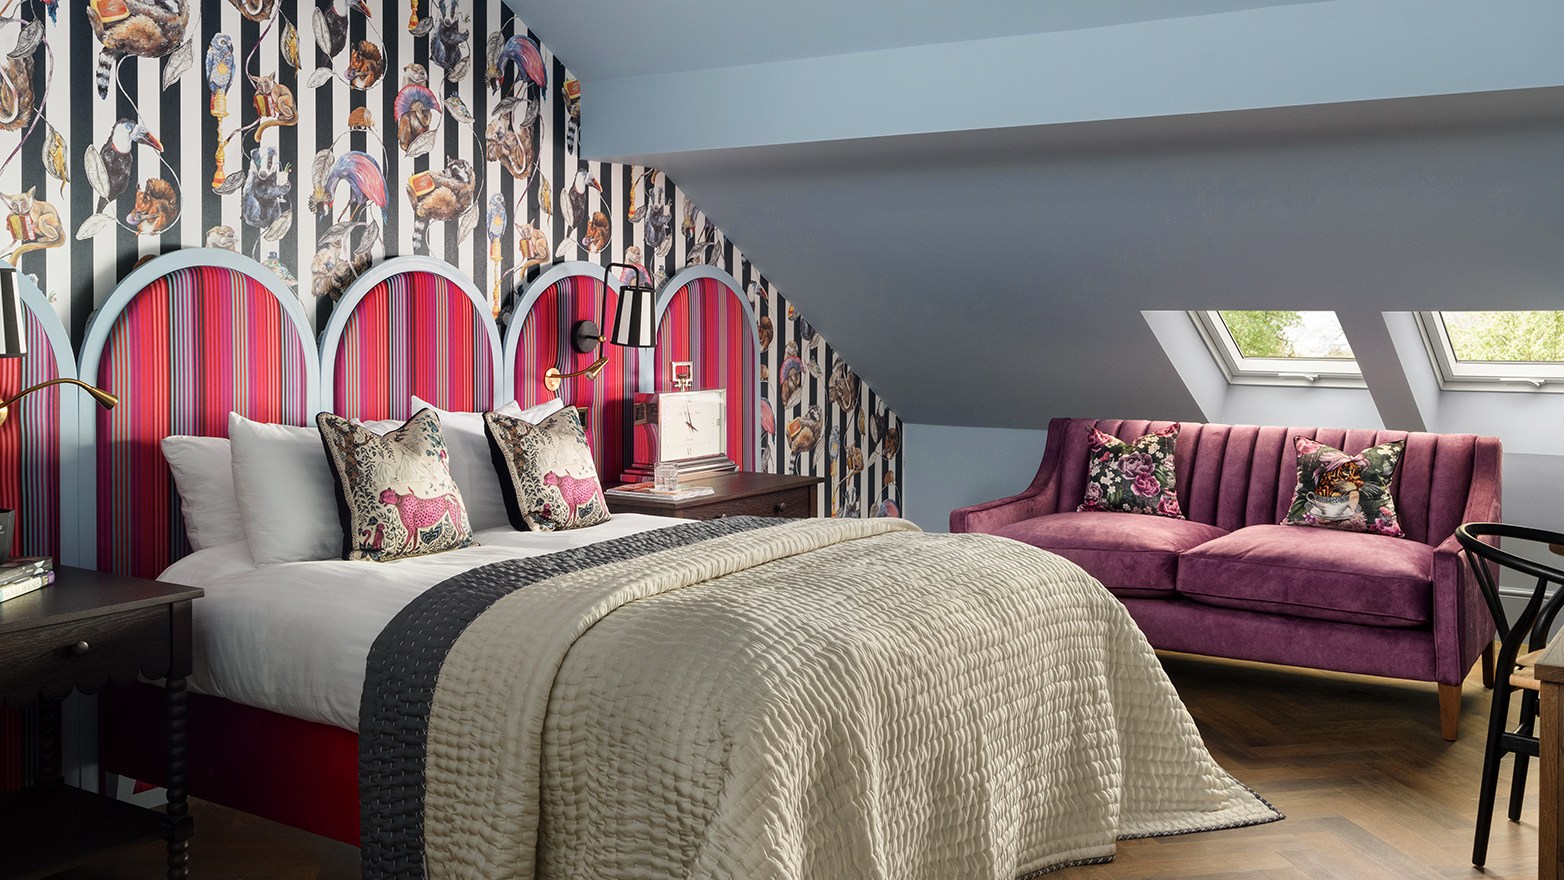 The Tempus Alnwick hotel review: bold, bonkers one-of-a-kind rooms close to the coast